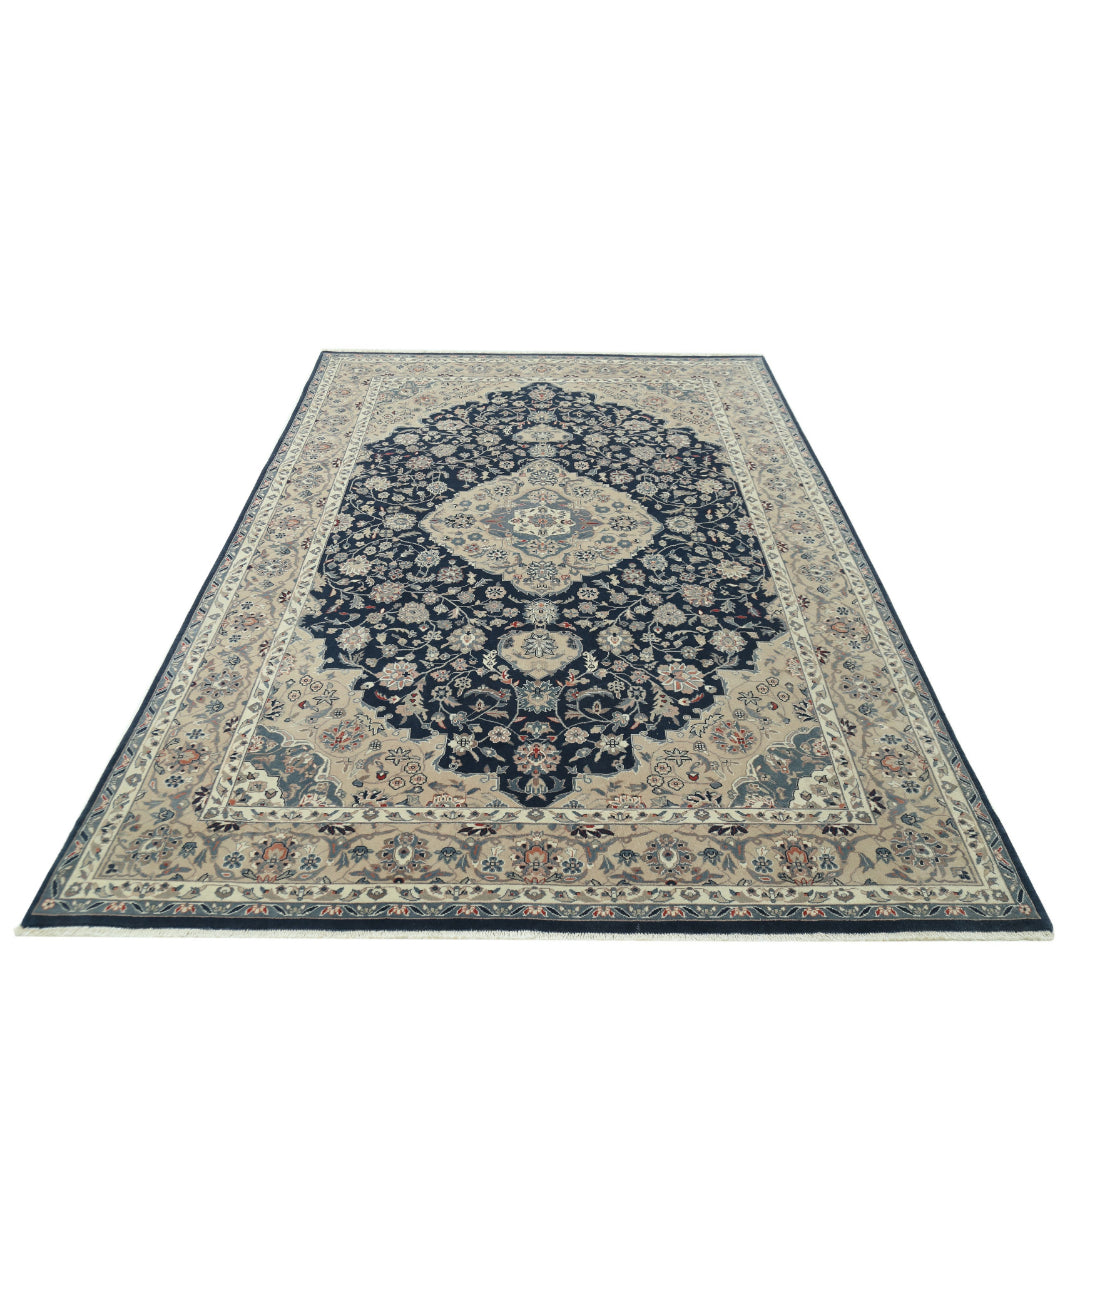 Hand Knotted Heritage Fine Persian Style Wool Rug - 5'11'' x 8'10'' 5'11'' x 8'10'' (178 X 265) / Blue / Taupe